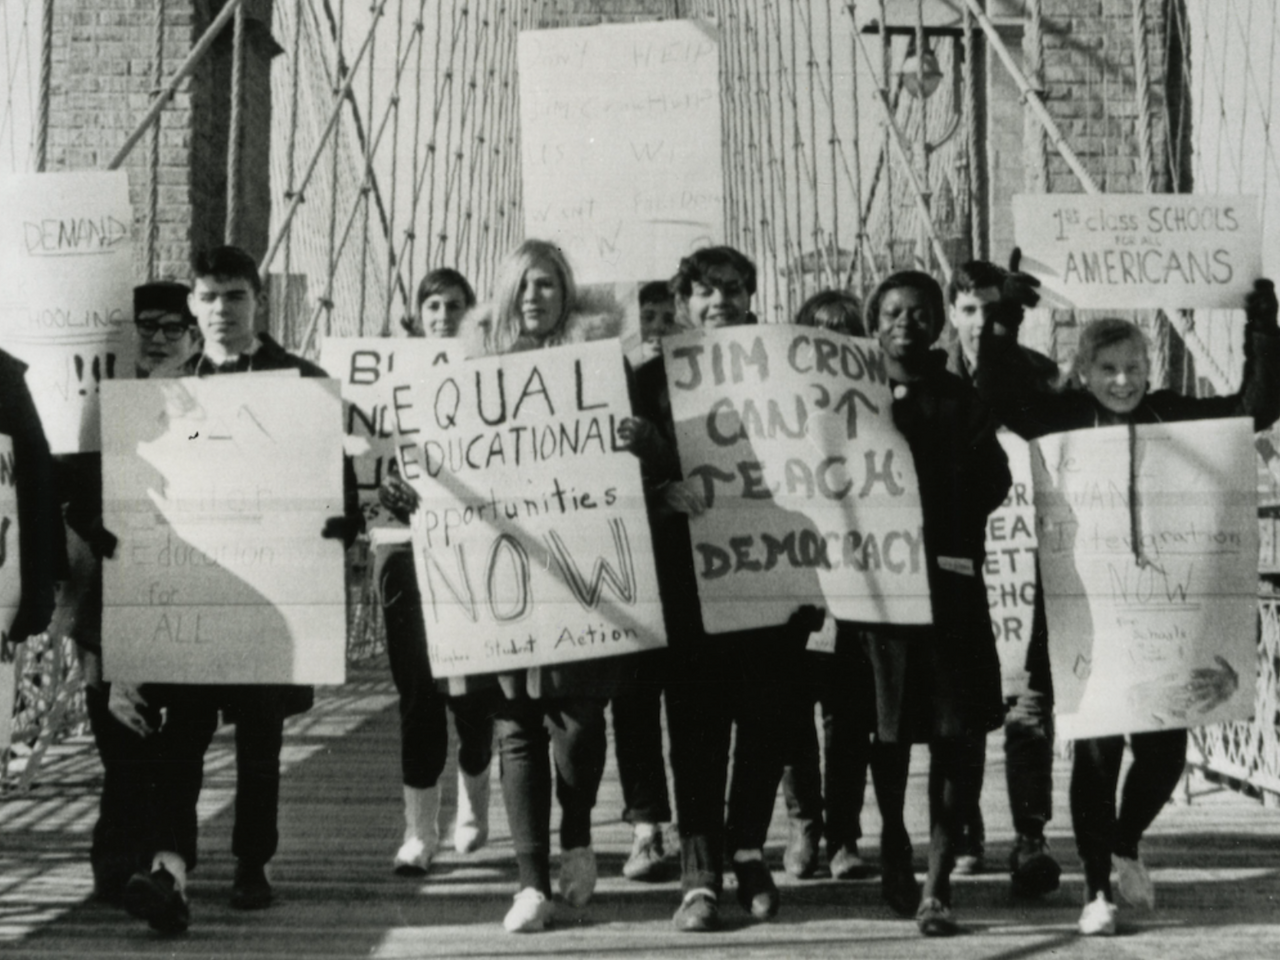 Black and white photograph of students protesting on Brooklyn Bridge